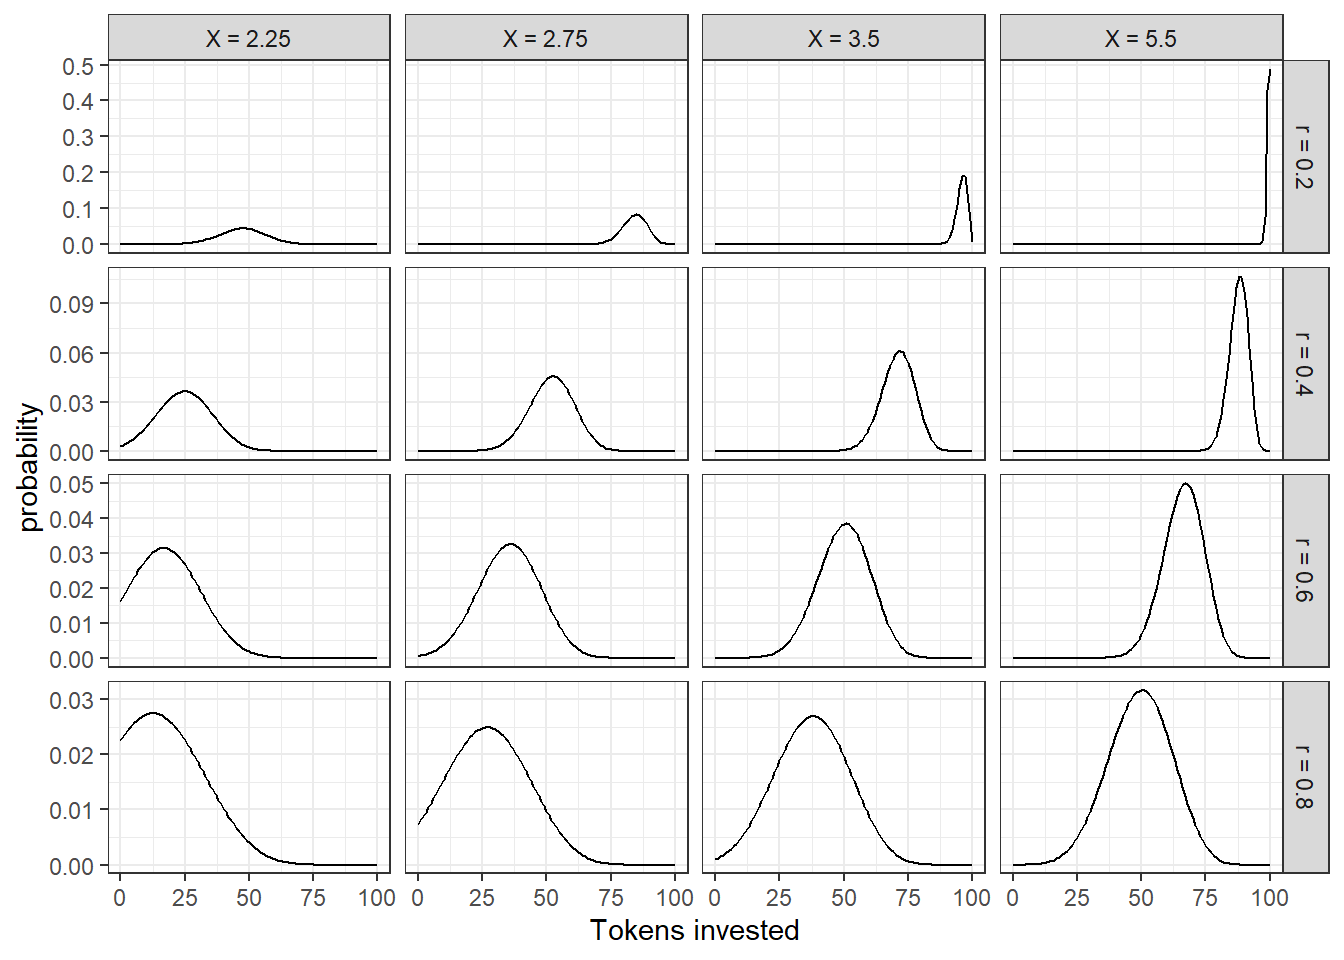 Probabilistic predictions for the investment task using a logistic choice rule